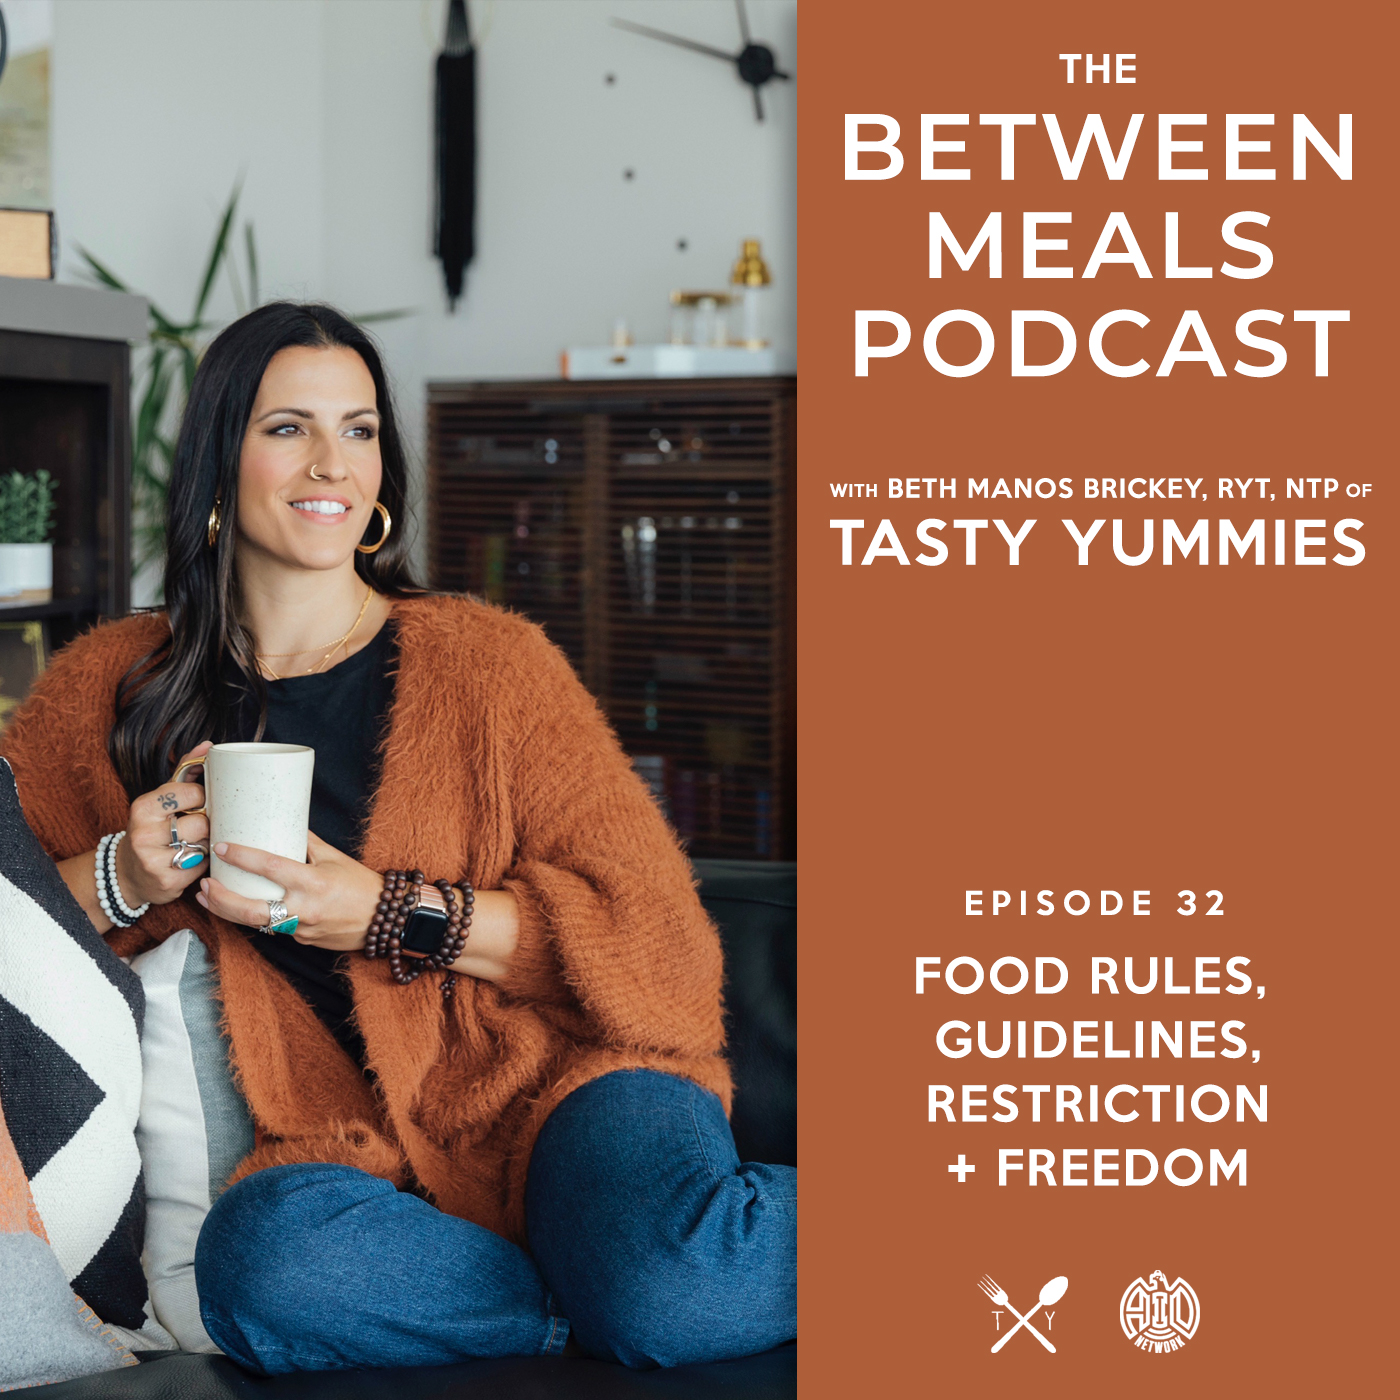 Between Meals Podcast. Episode 32: Food Rules, Guidelines, Restriction and Freedom